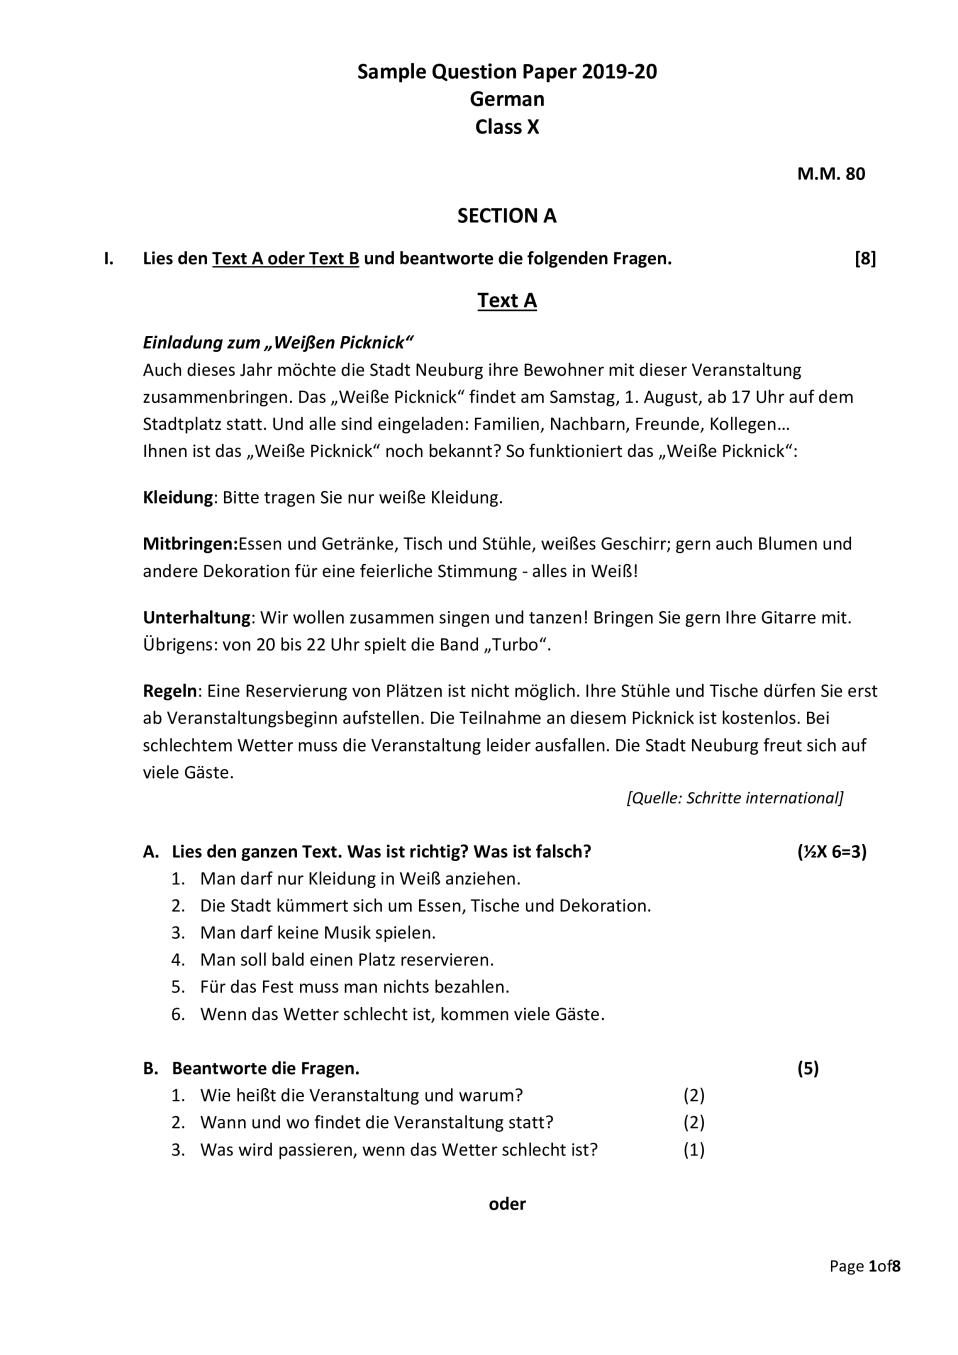 CBSE Class 10 Sample Paper 2020 for German - Page 1